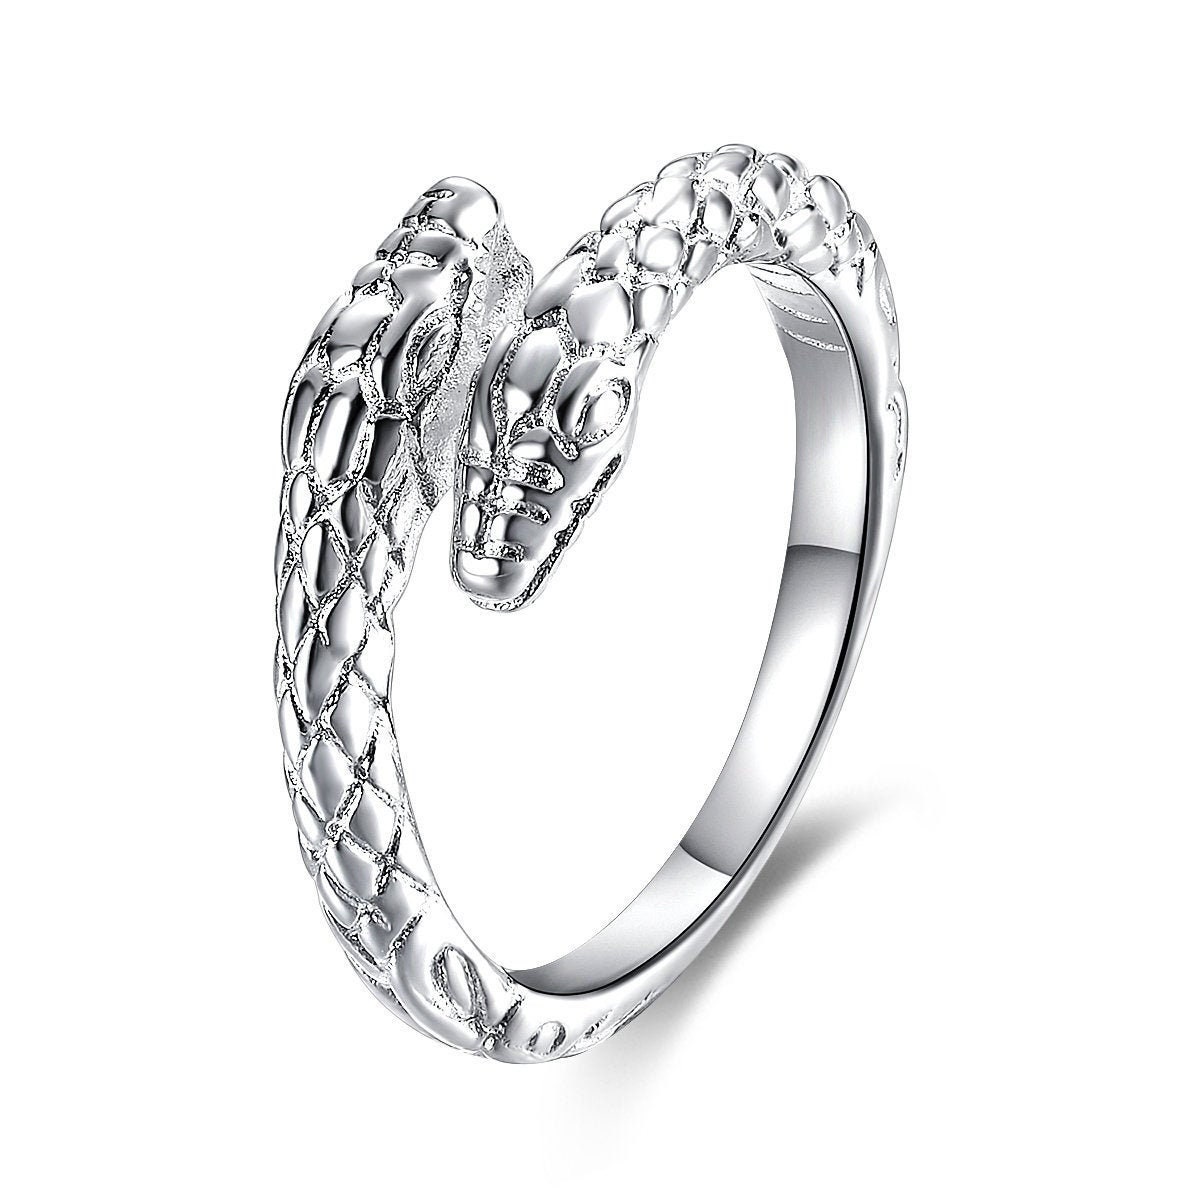 Unique Snake Ring Designs in Silver for a Stylish Look